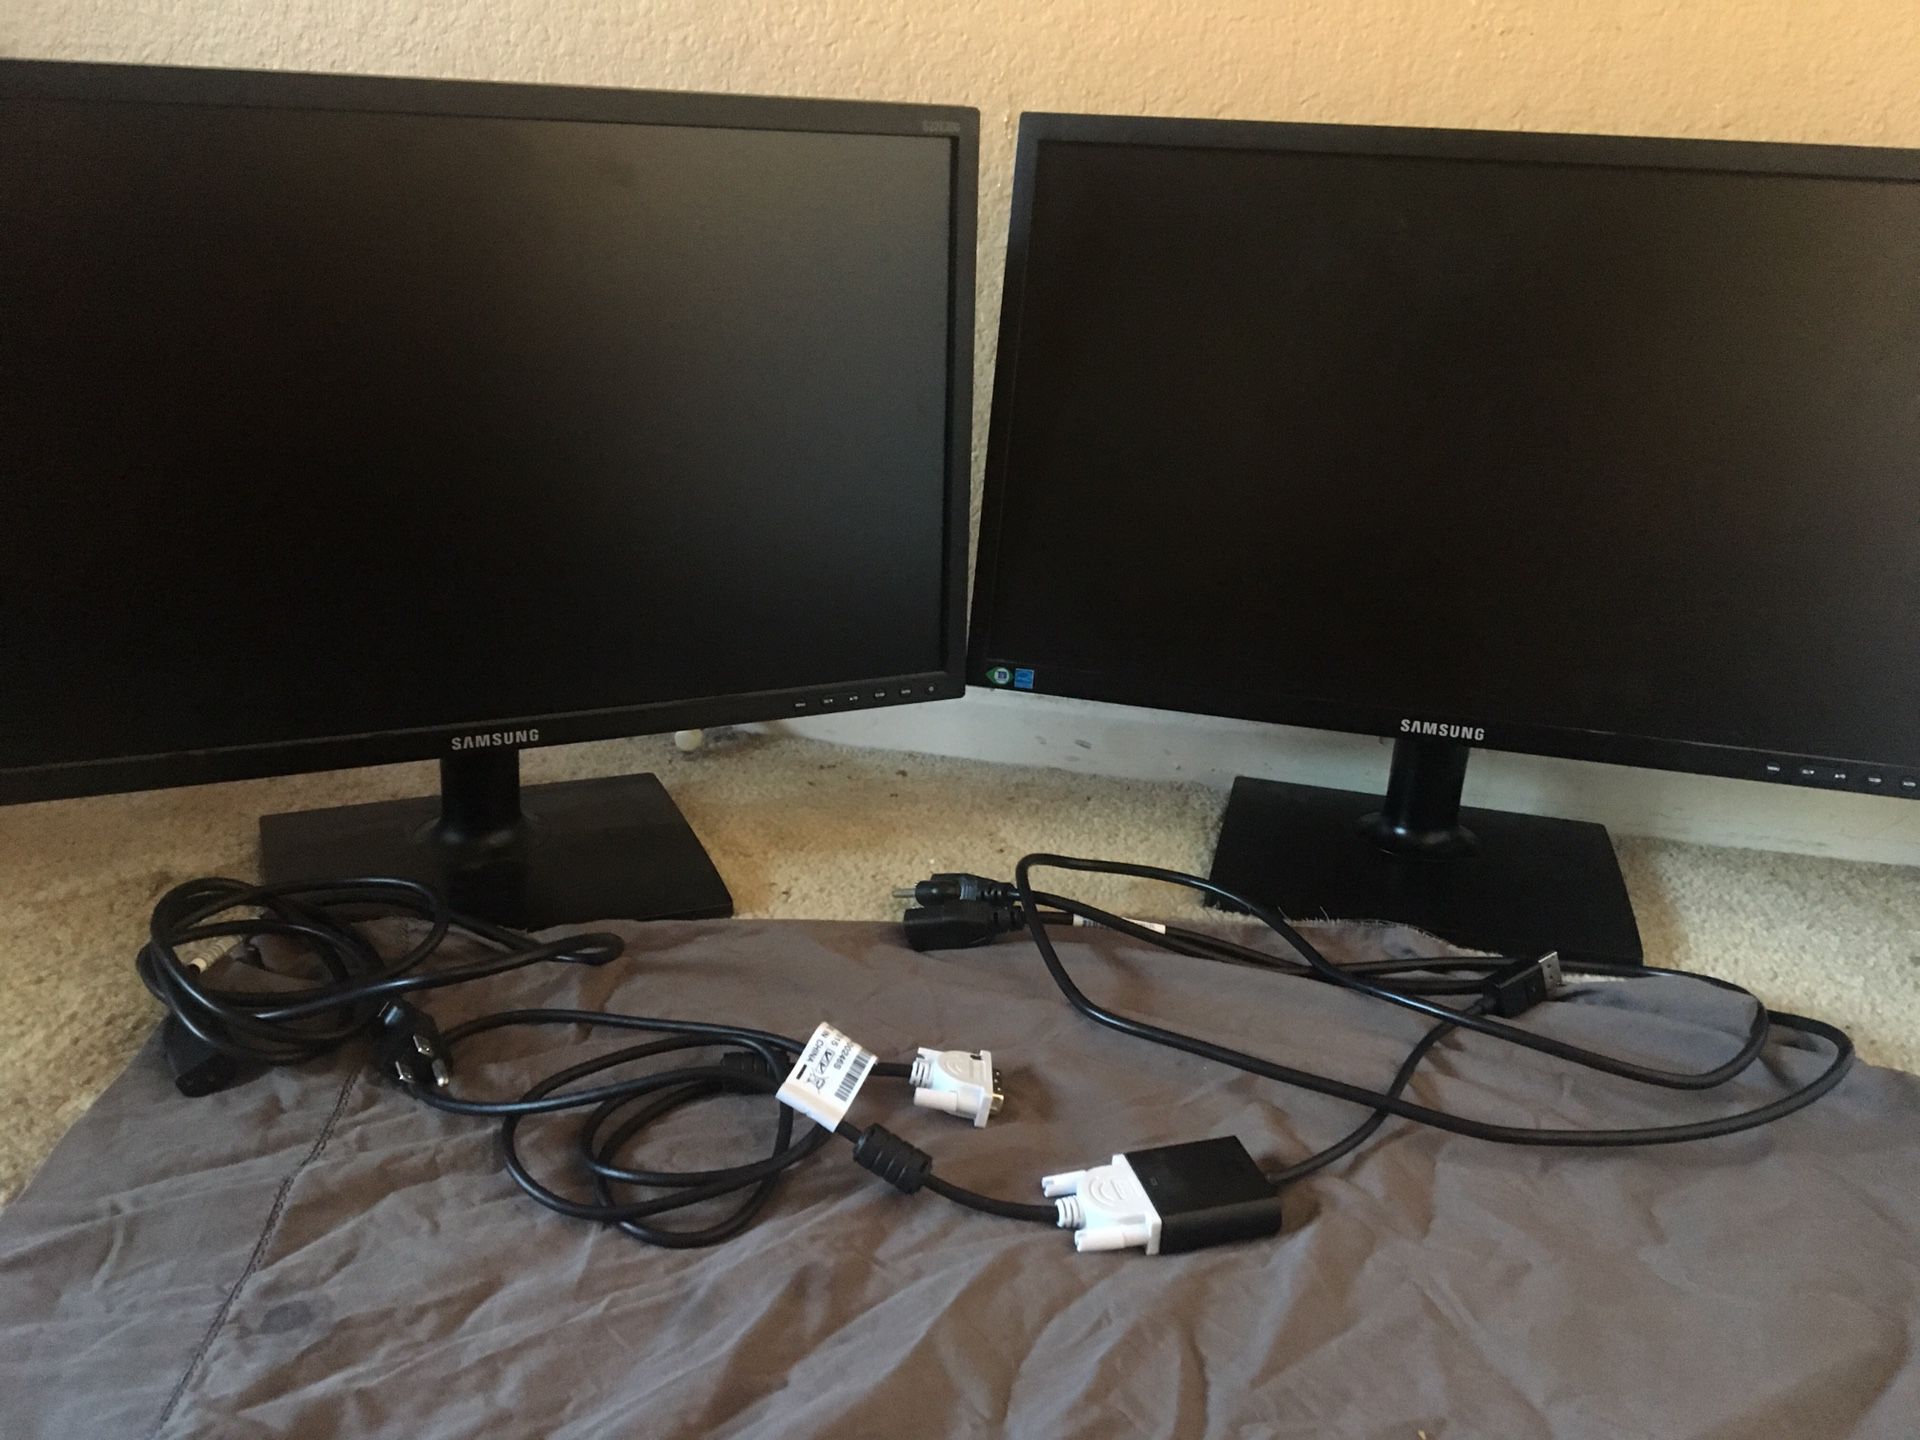 Two Samsung S22E200 computer monitors including splitter for dual use